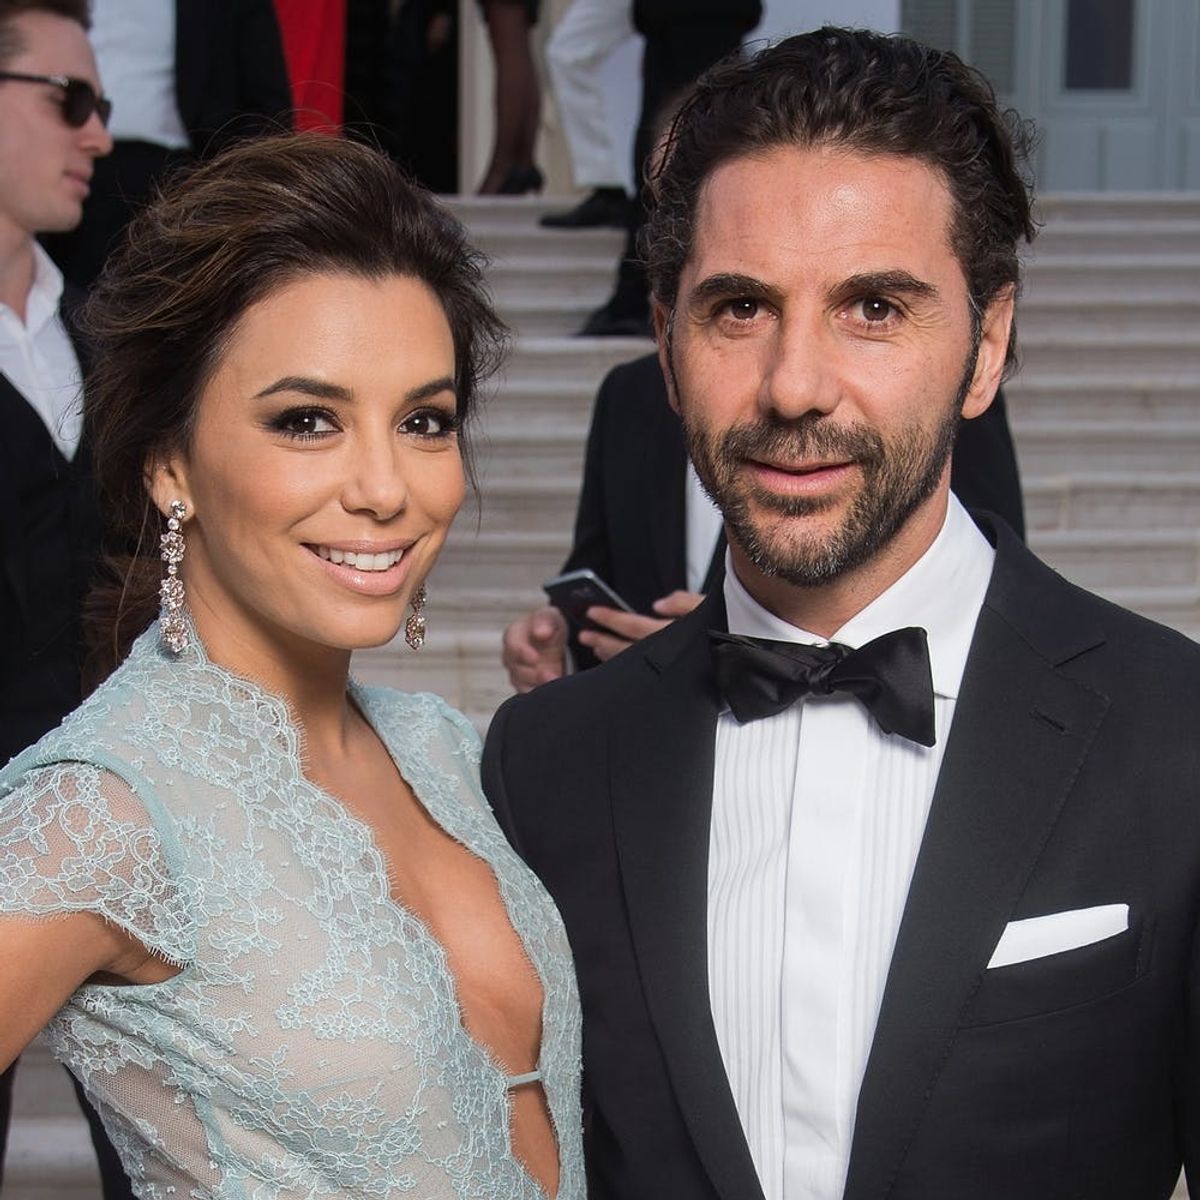 Eva Longoria Is Pregnant and Expecting Her First Child With Jose Bastón